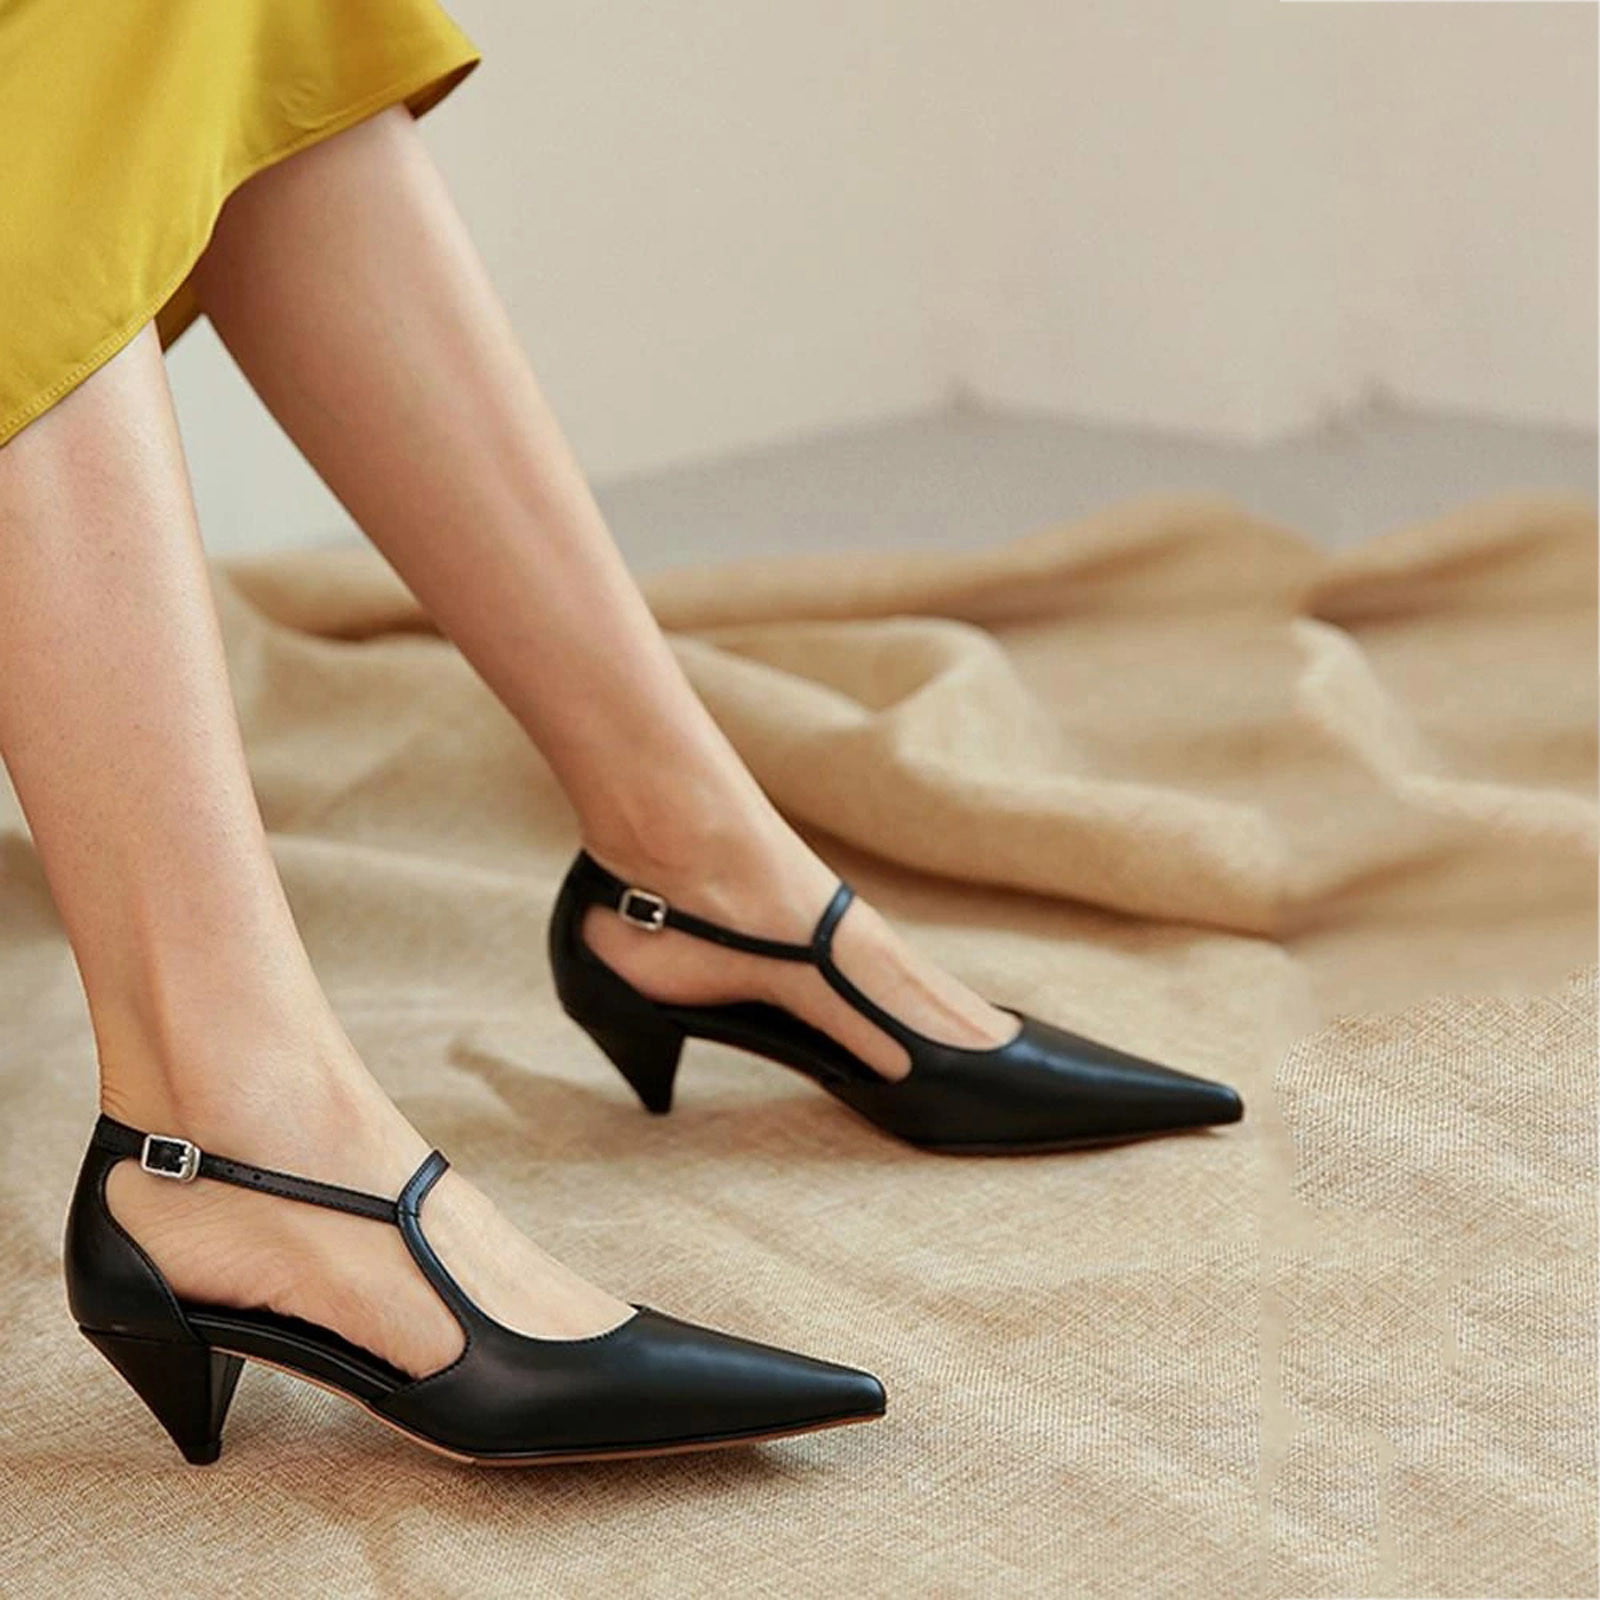 Fashion Women Shoes Pointed Toe Pumps Low Heel Metal Chain Woman High Heels  Black Soft Leather Ladies Work Dress Shoes - AliExpress